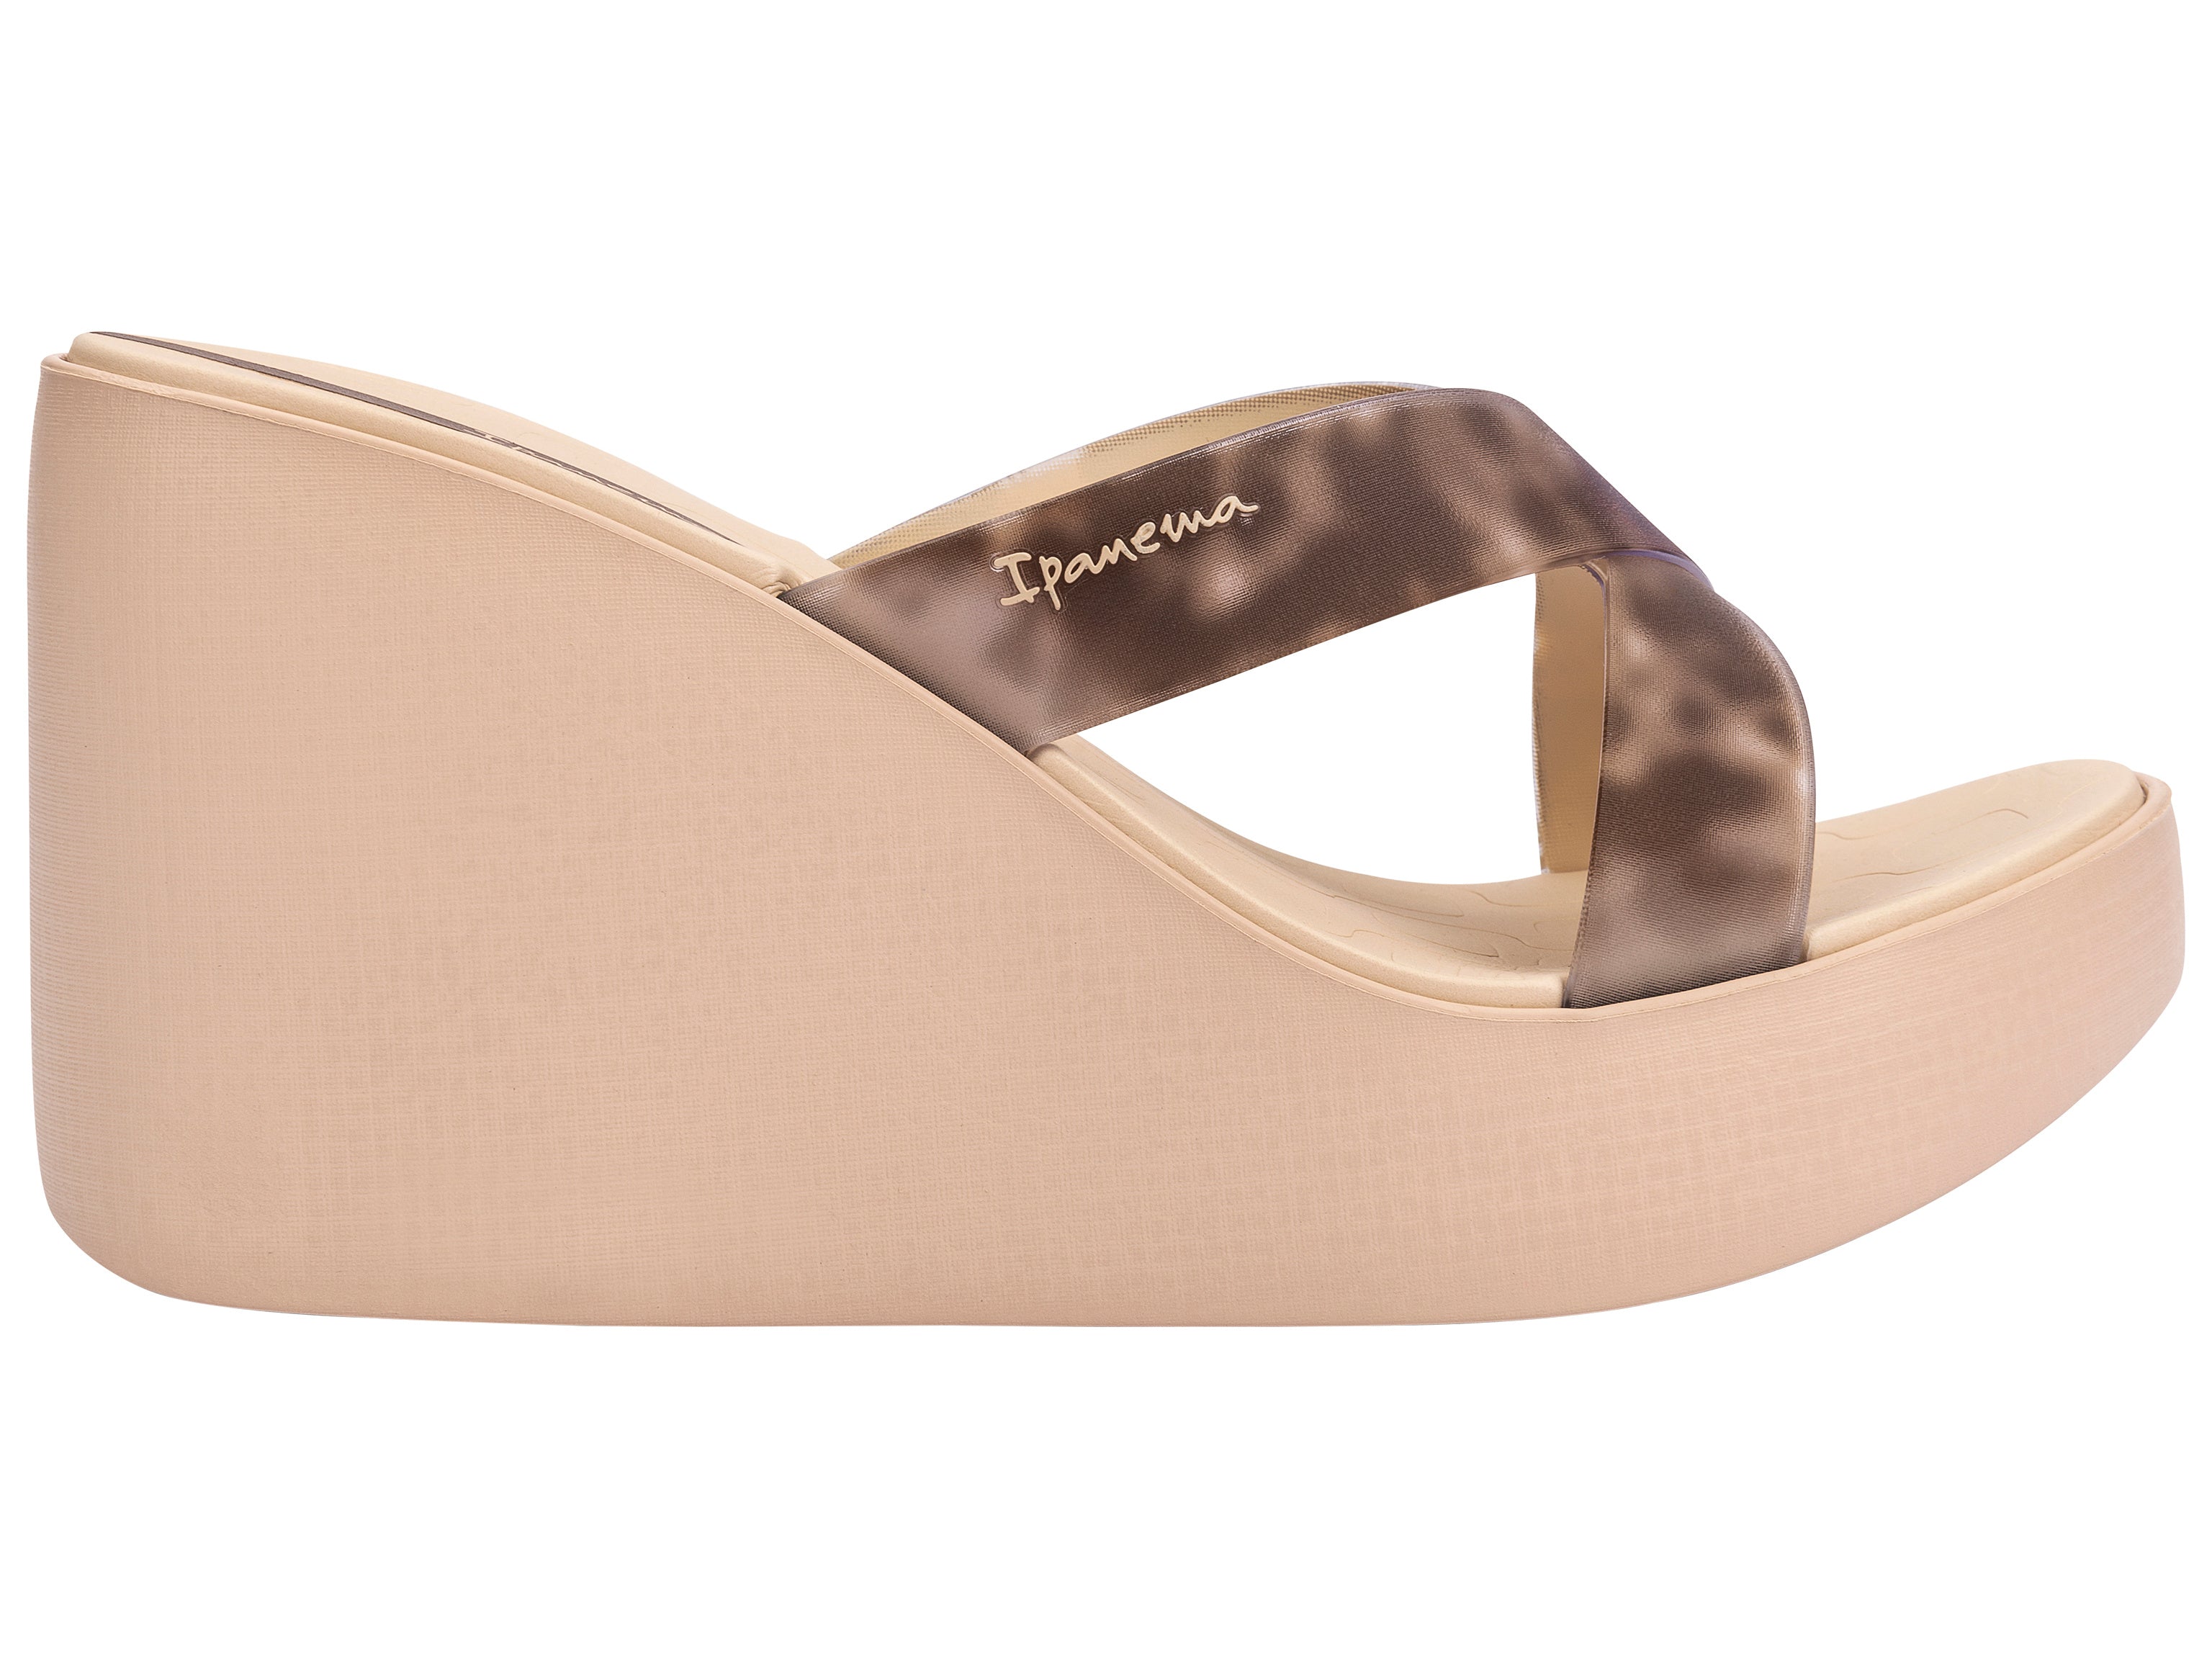 Outer side view of a beige Ipanema High Fashion women's wedge platform flip flop.